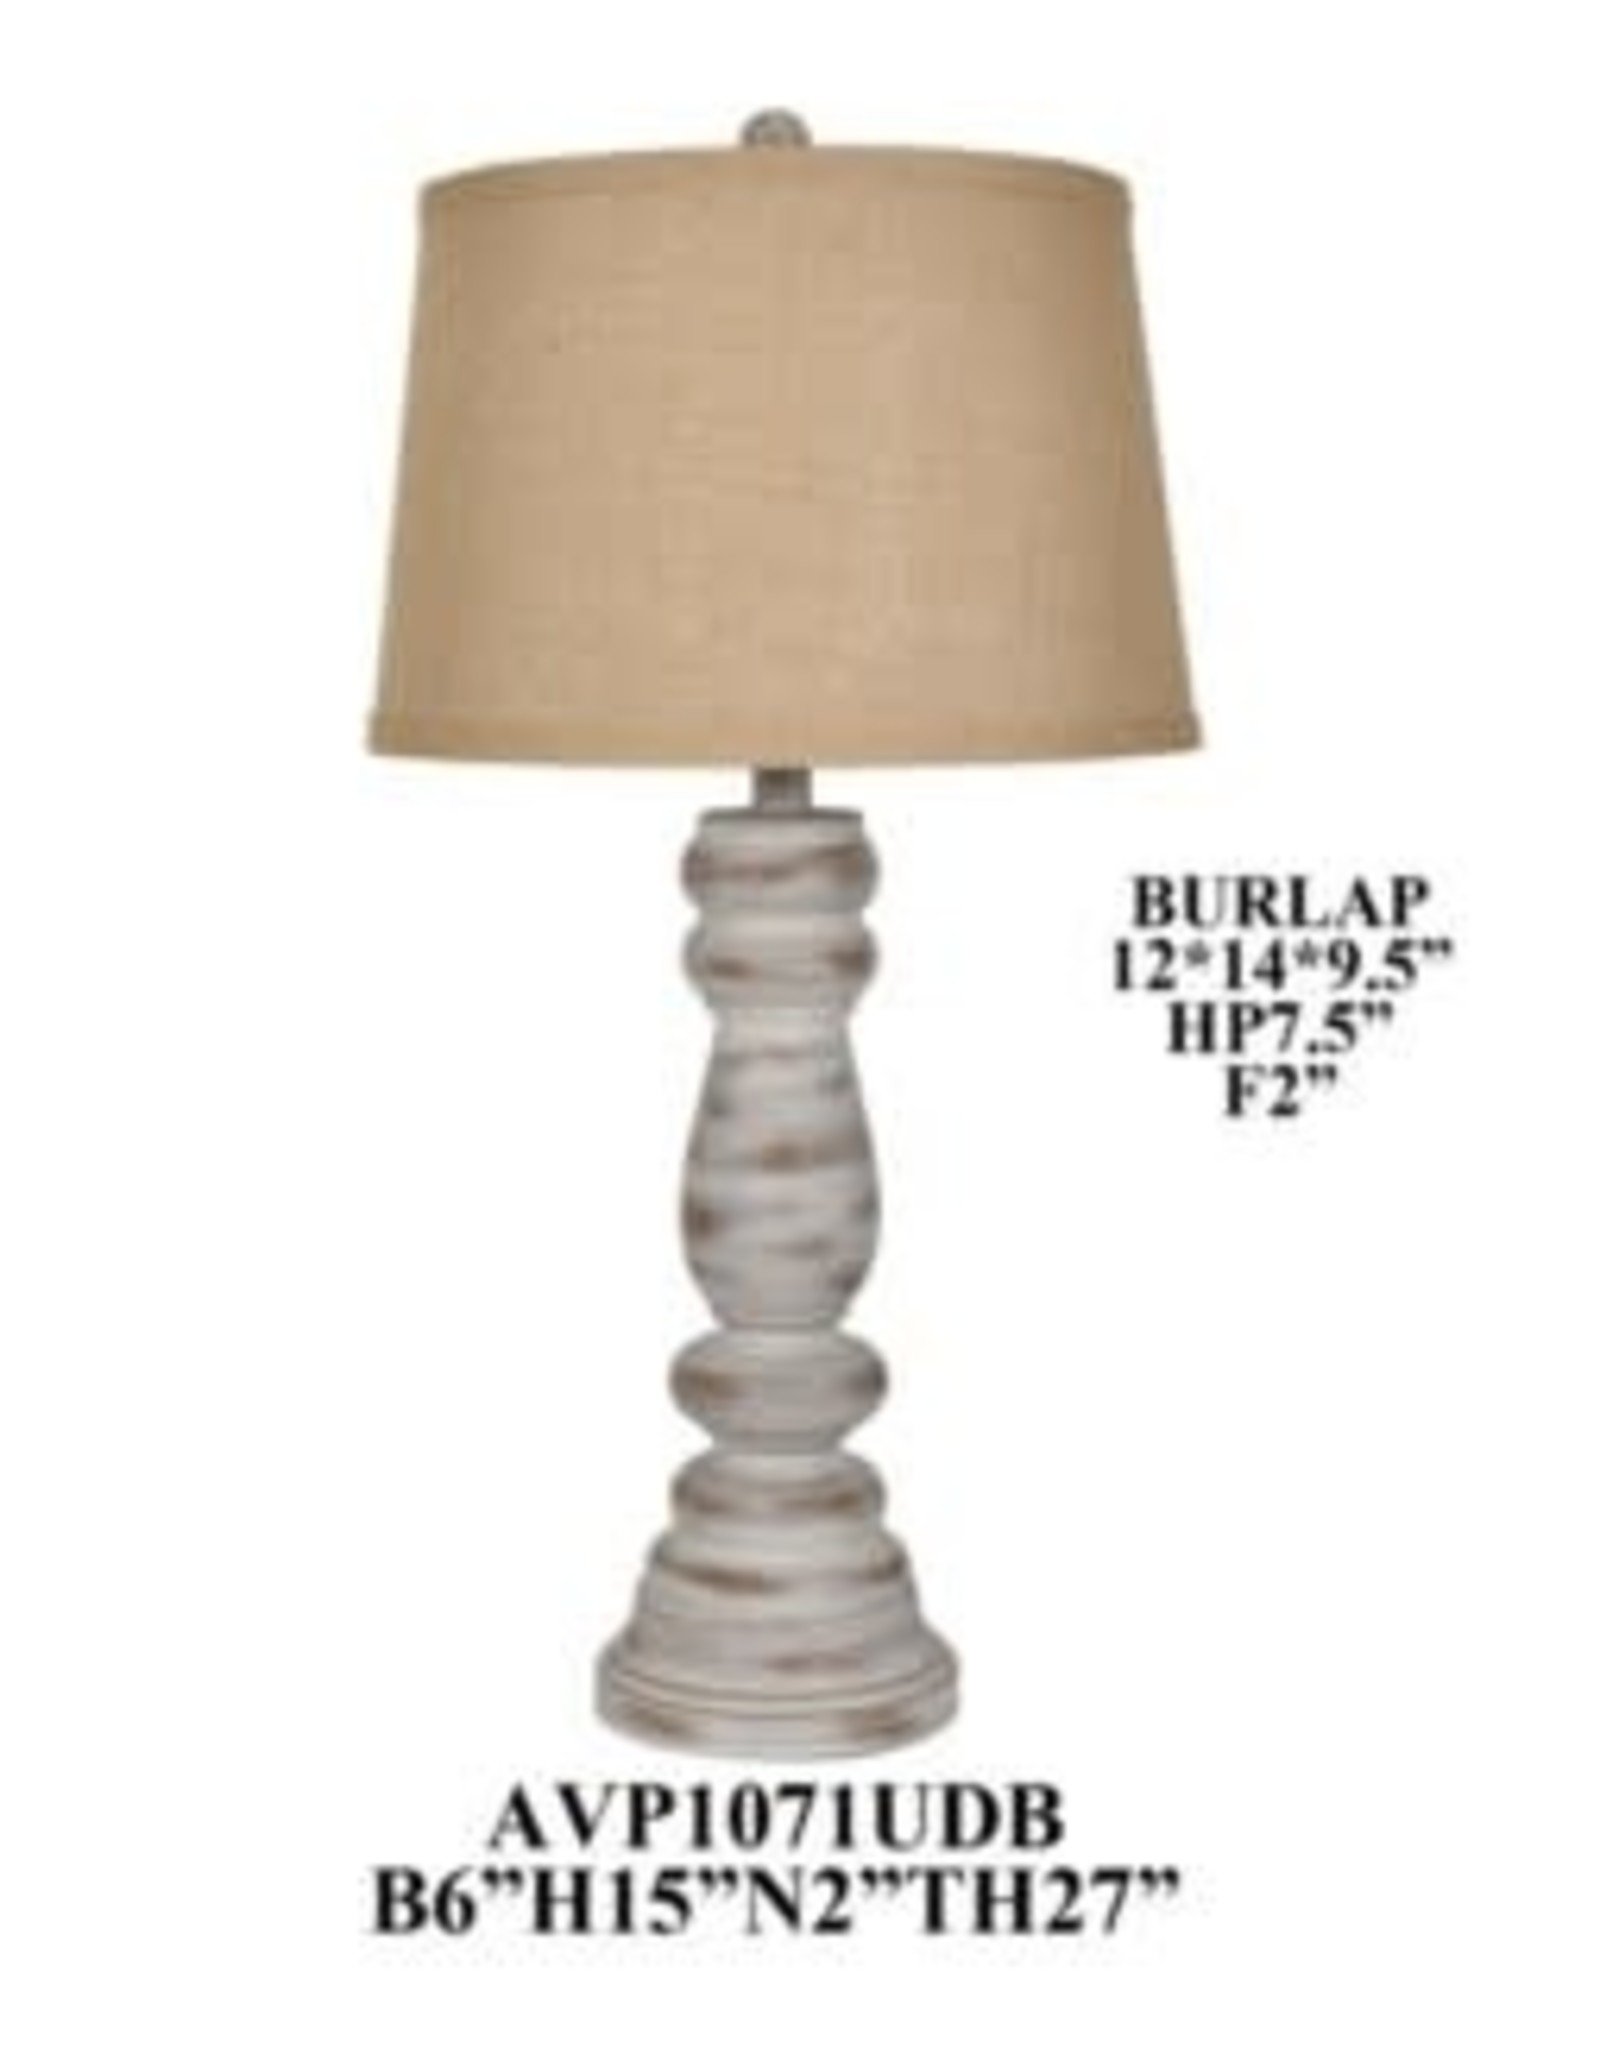 Crestview Distressed Brown and Cream Lamp